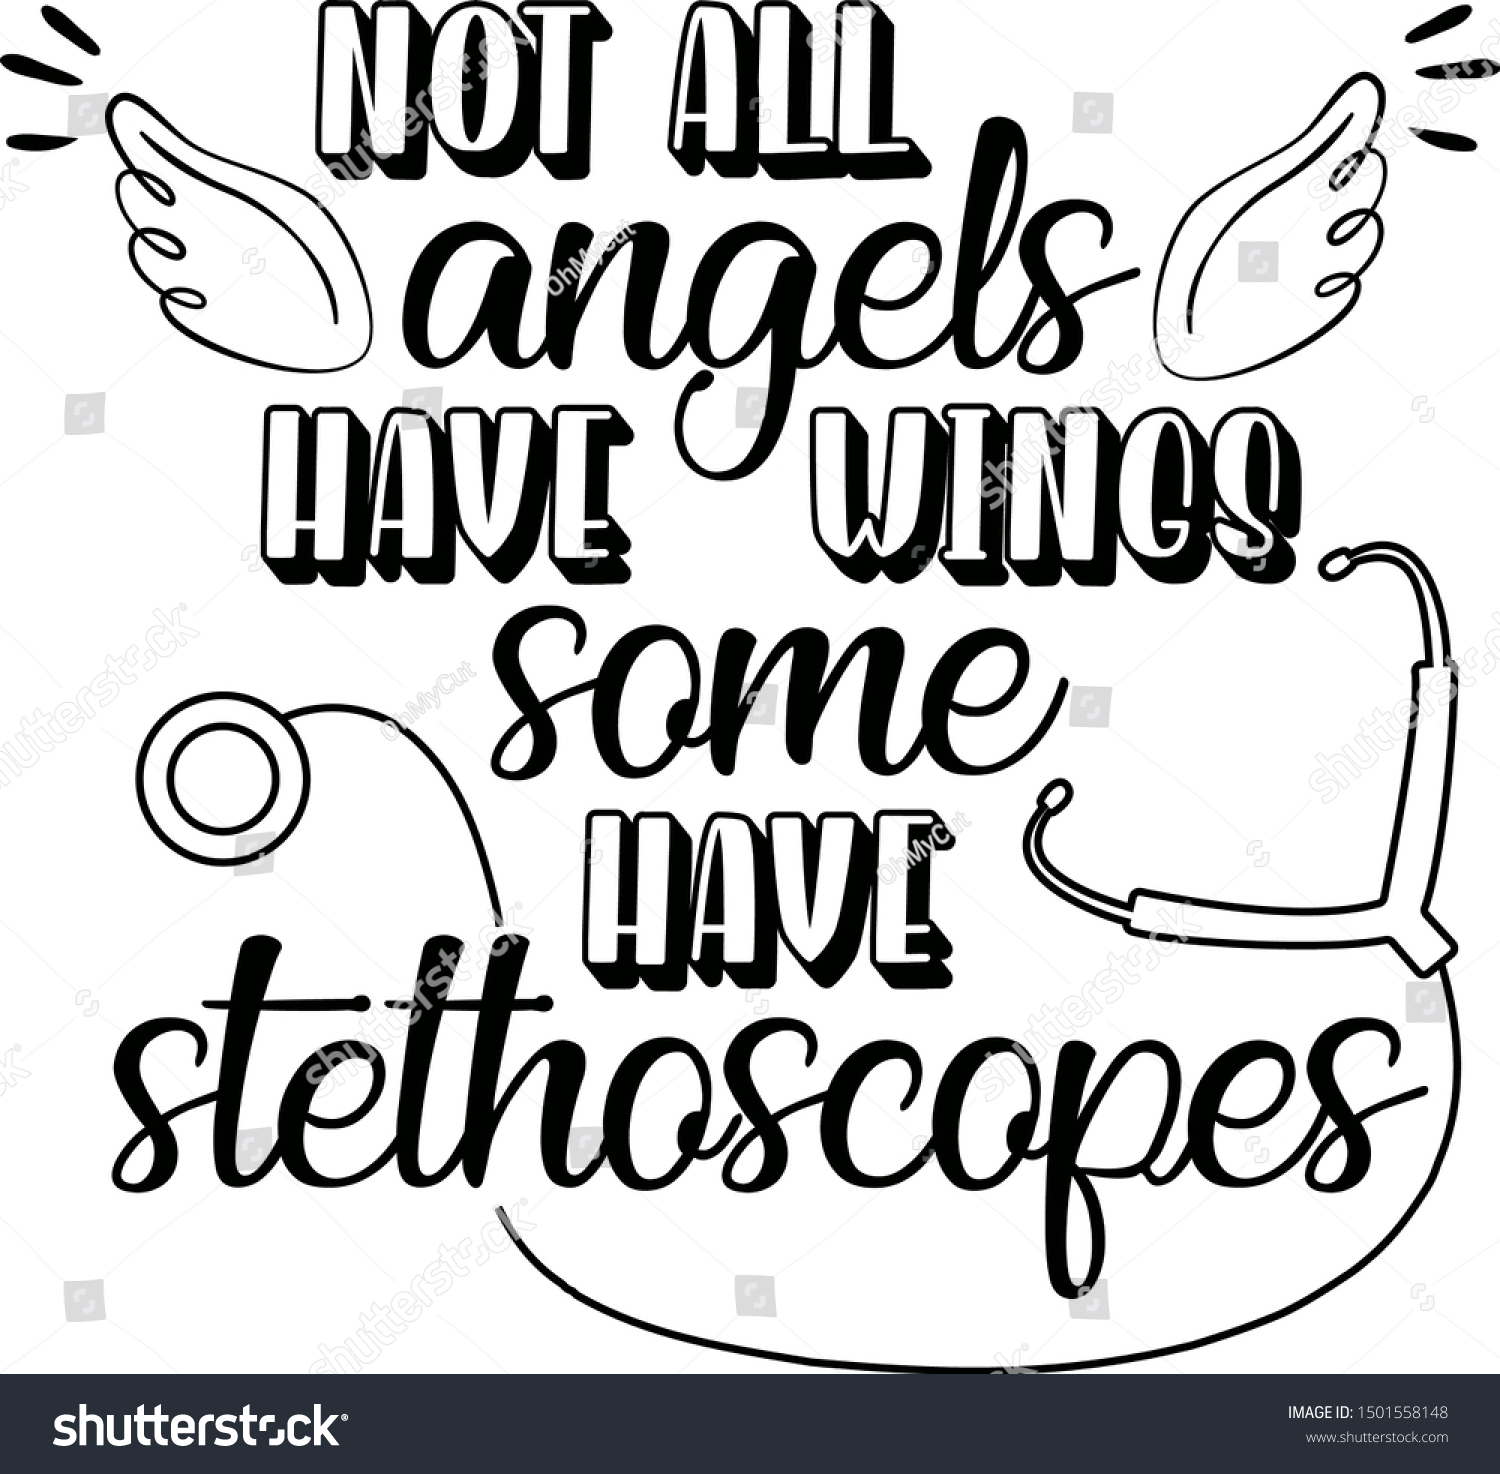 SVG of Not all angels have wings some have stethoscopes. Vector file. Nurse quote clipart. svg